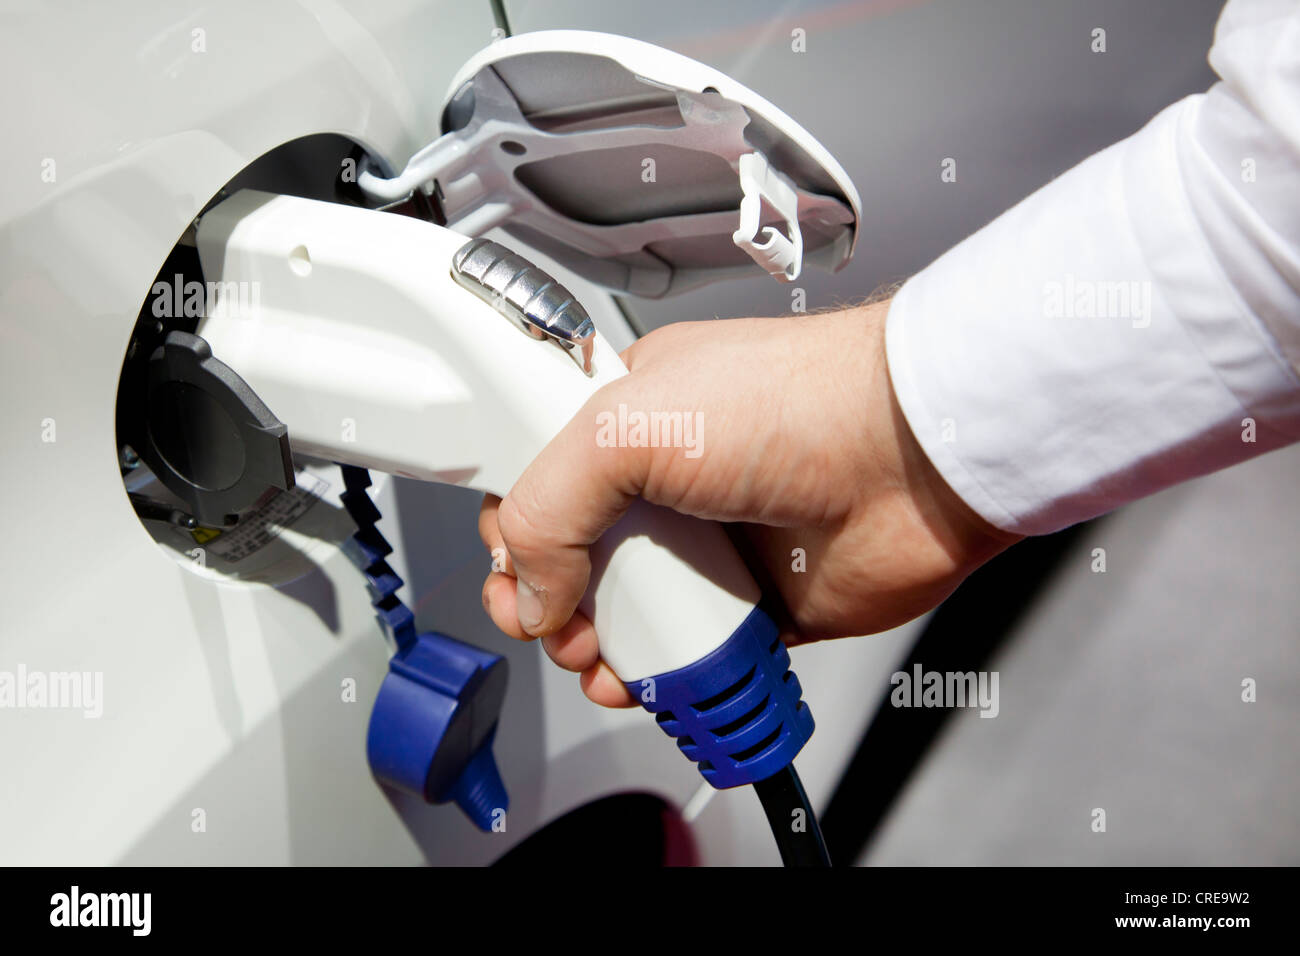 Charging with a 230 volt plug, pistol grip charger, on an electric car, 64th International Motor Show, IAA, 2011 Stock Photo